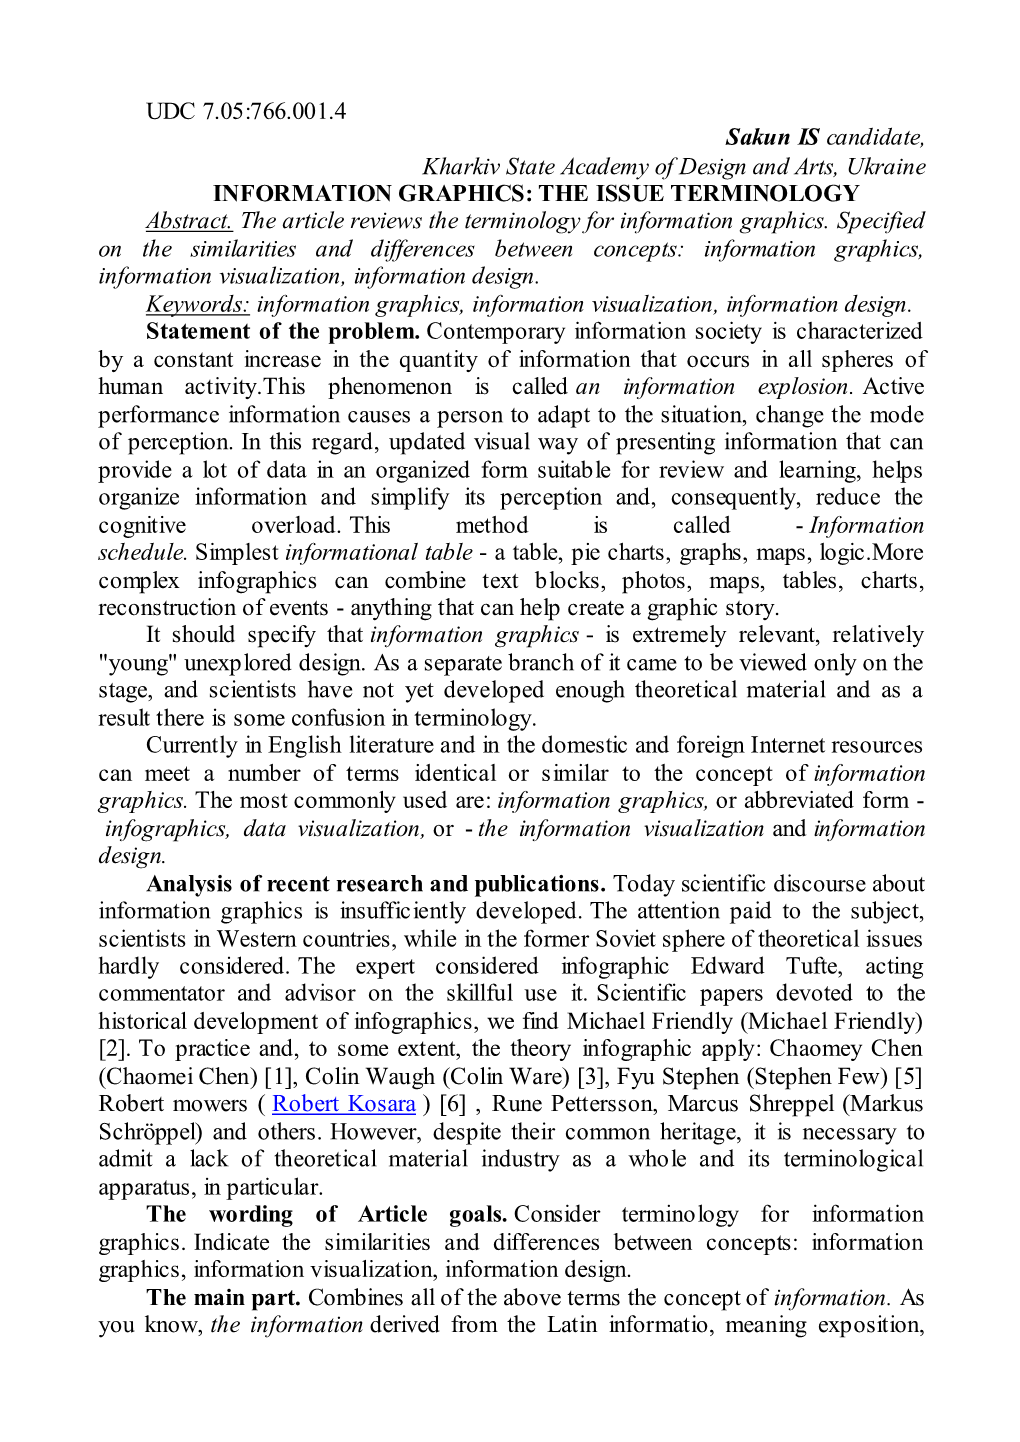 UDC 7.05:766.001.4 Sakun IS Candidate, Kharkiv State Academy of Design and Arts, Ukraine INFORMATION GRAPHICS: the ISSUE TERMINOLOGY Abstract